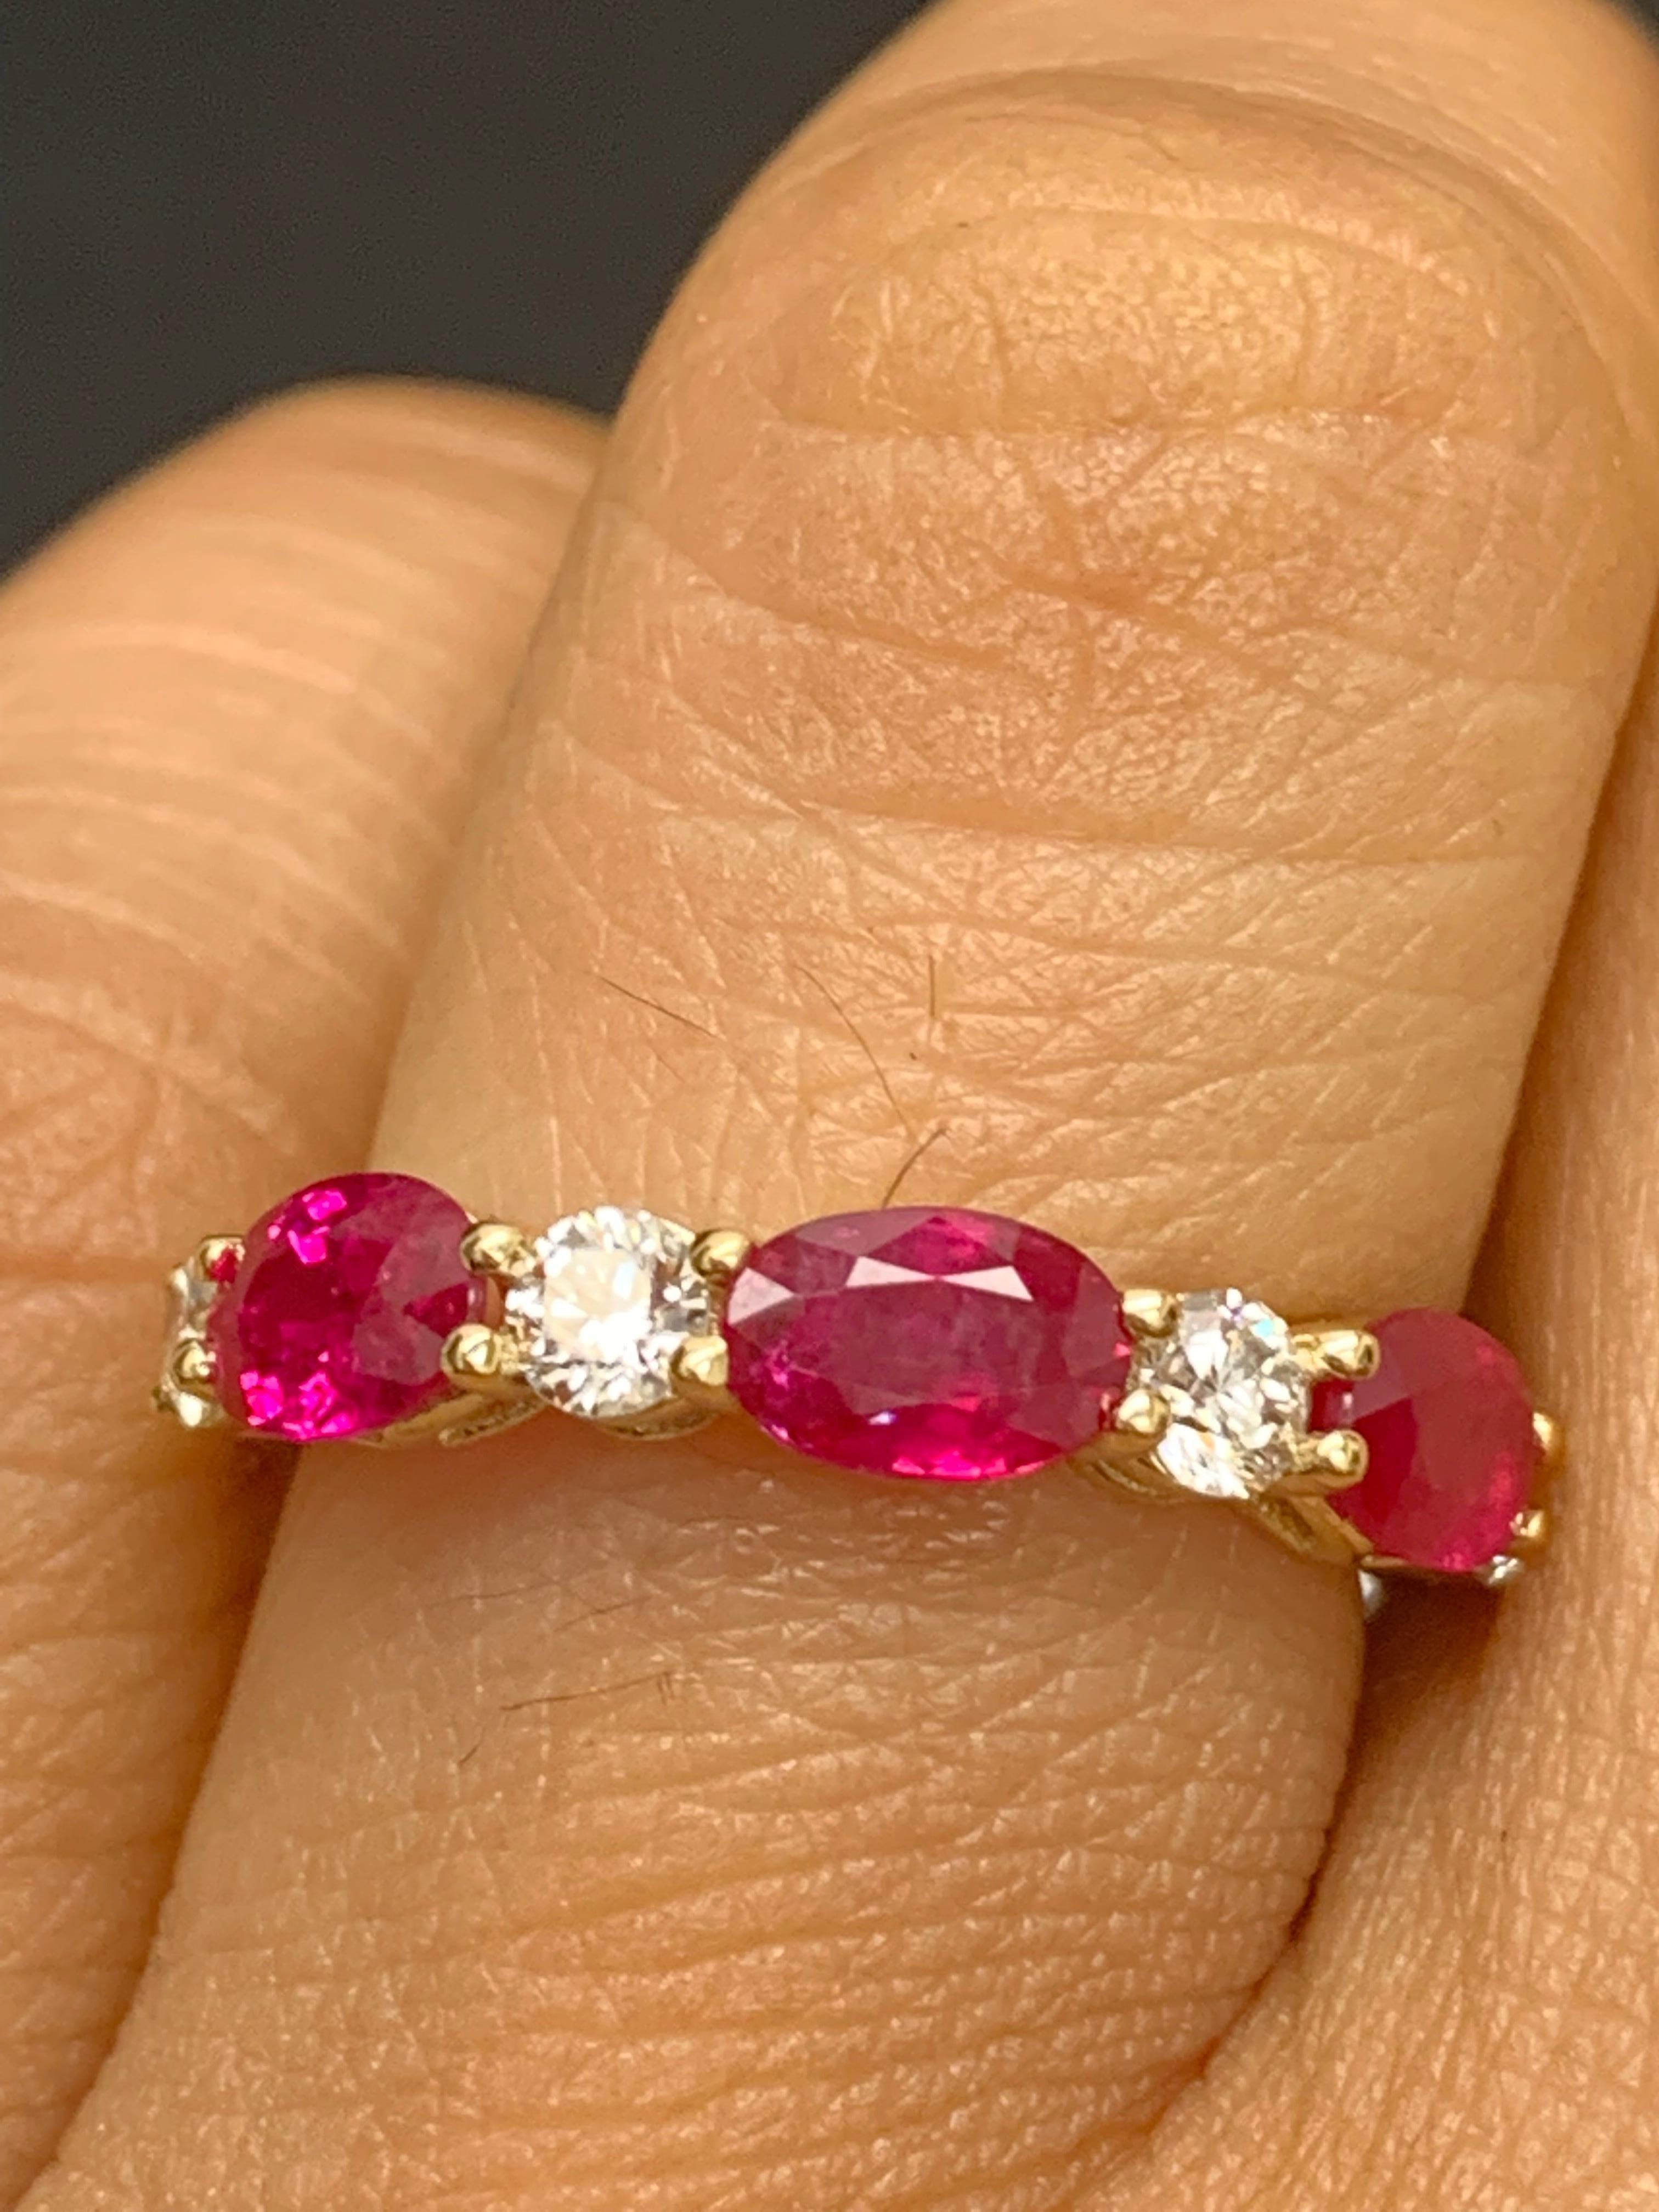 Handcrafted to perfection; showcasing color-rich oval cut rubies that elegantly alternate round diamonds in a 14k Yellow  gold setting. 
The 3 rubies weigh 1.71 carats total and 4 diamonds weigh 0.61 carats total.

Size 6.5 US (Sizable). One of a